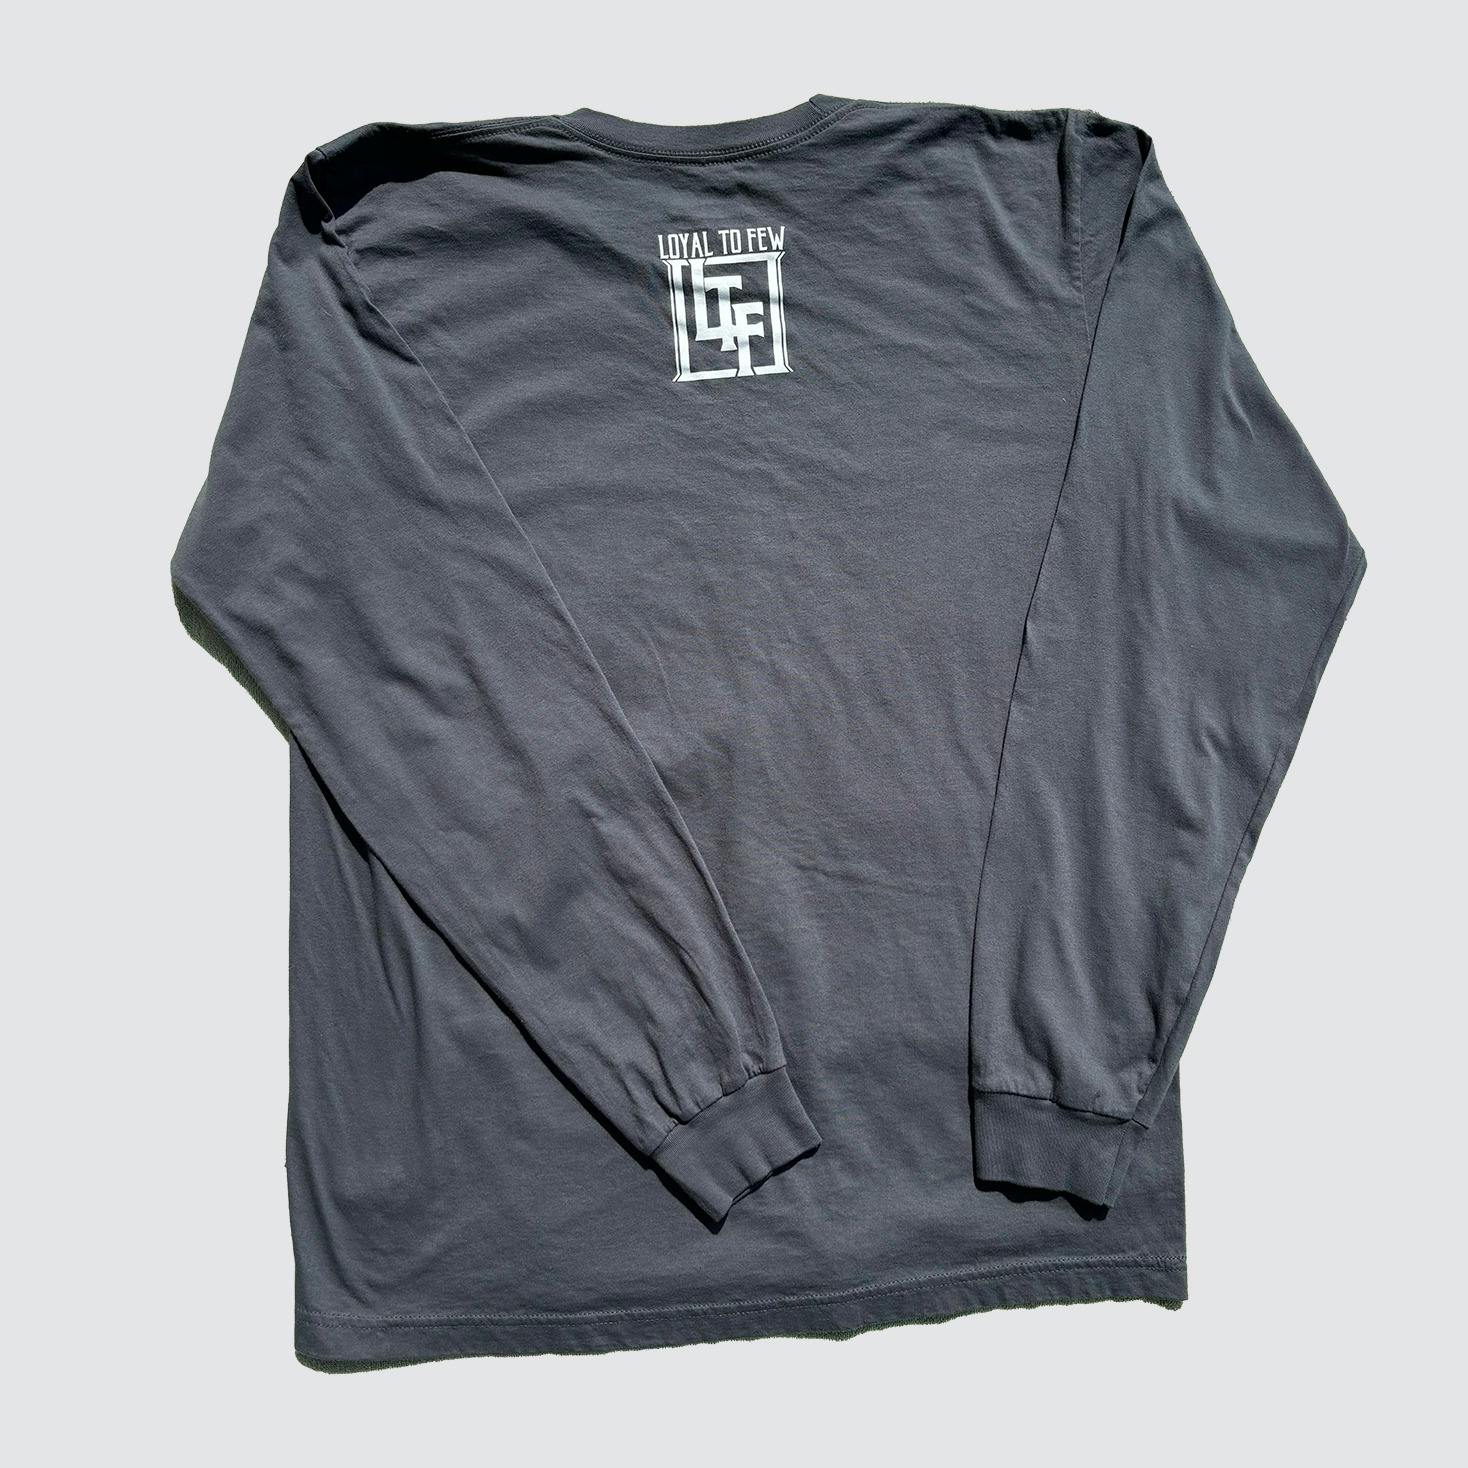 Cotton Long-Sleeve with Original 1